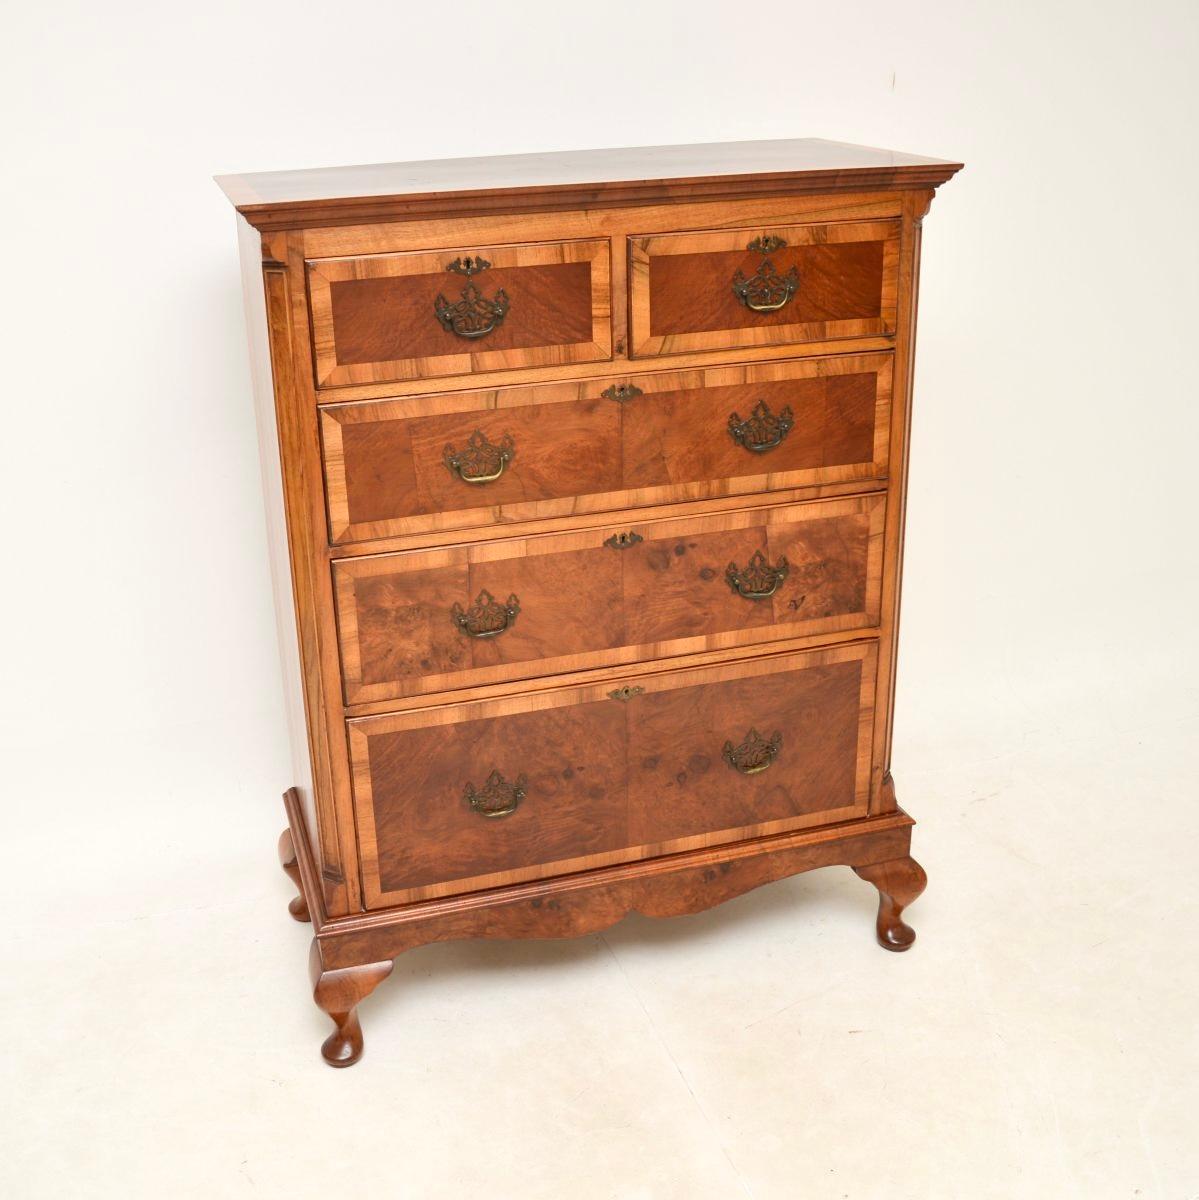 A superb antique burr walnut chest of drawers. This was made in England, it dates from around the 1890-1900 period.

The quality is outstanding, this is beautifully made and is a great size. There is lots of storage space inside the generous